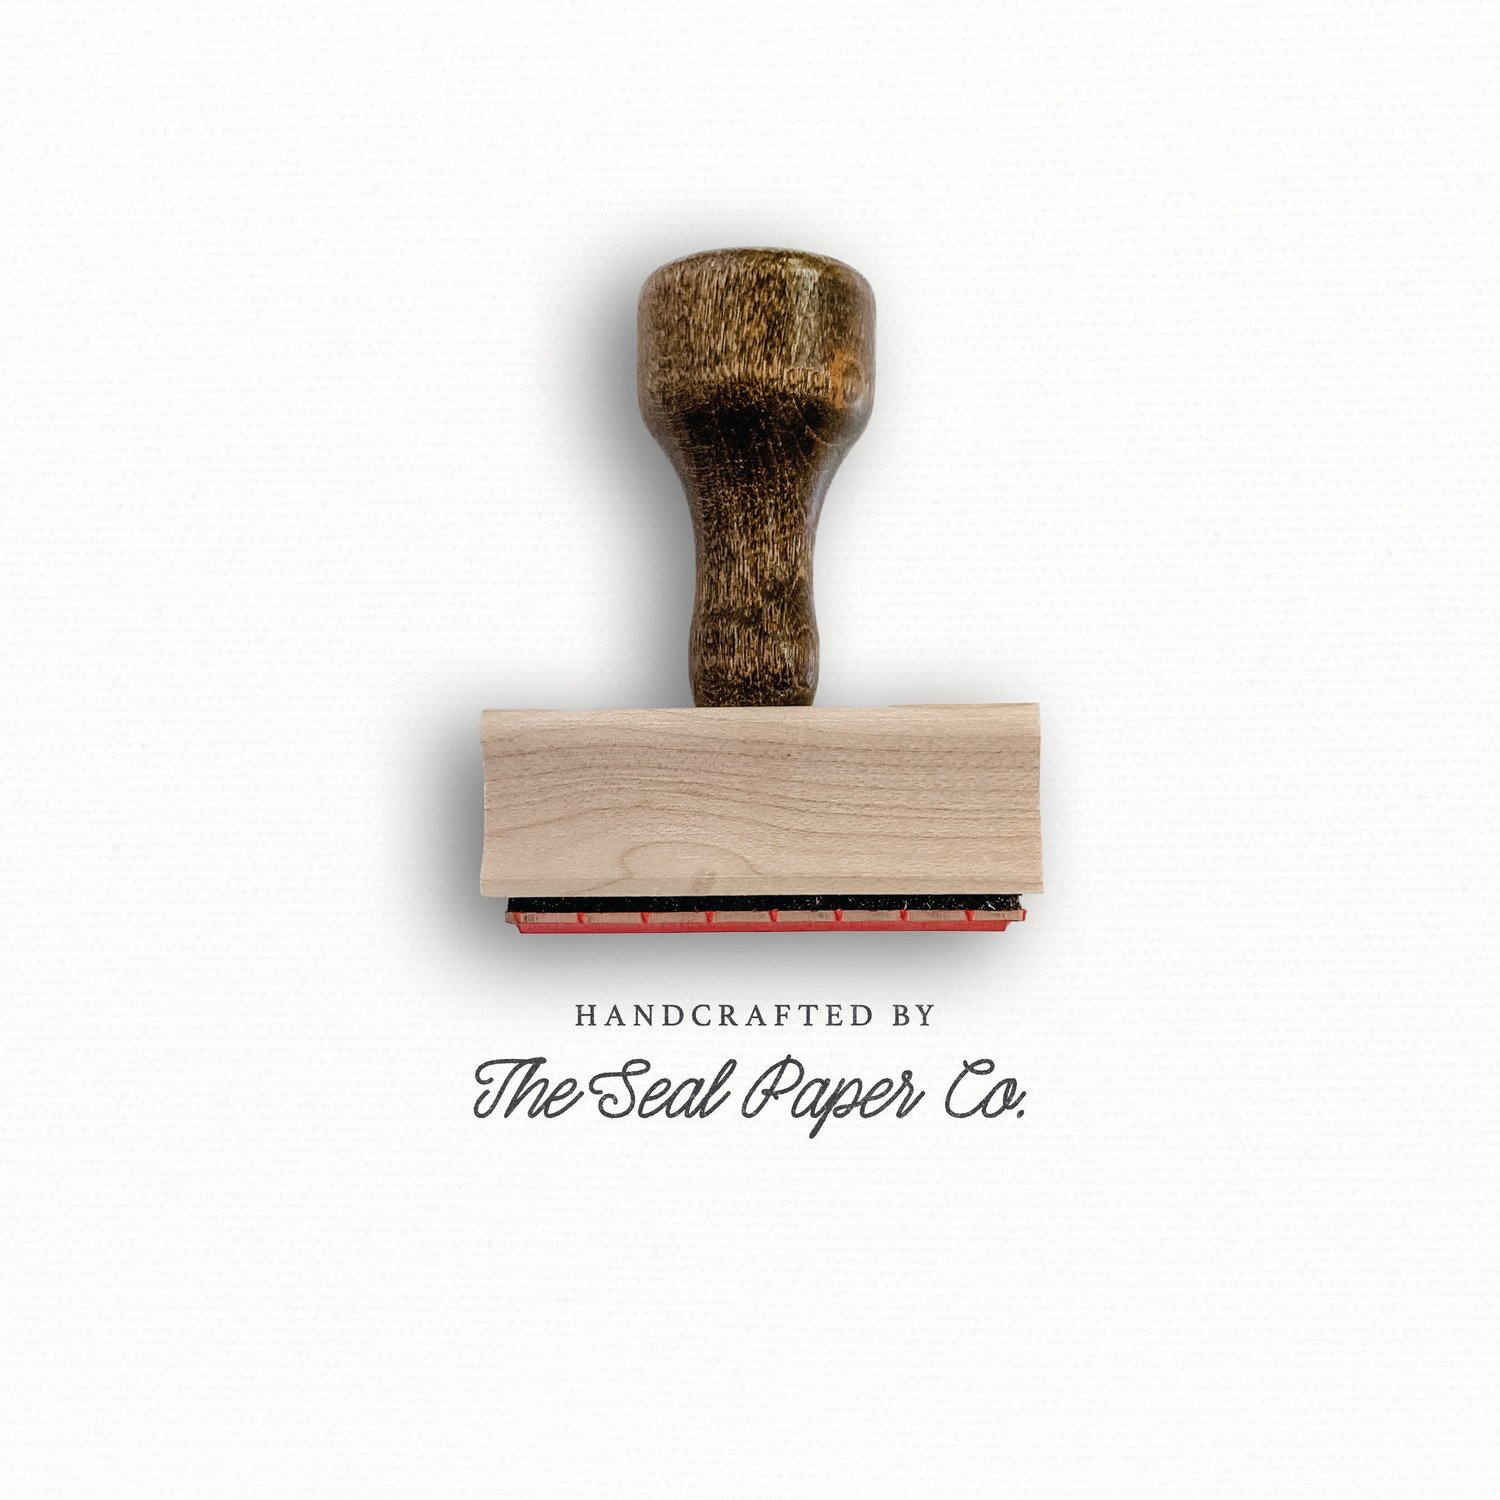 Custom Handcrafted by Stamp, Custom Logo Stamp, Small Business  Packaging Stamp, Ribbon Stamp, Custom Stamp